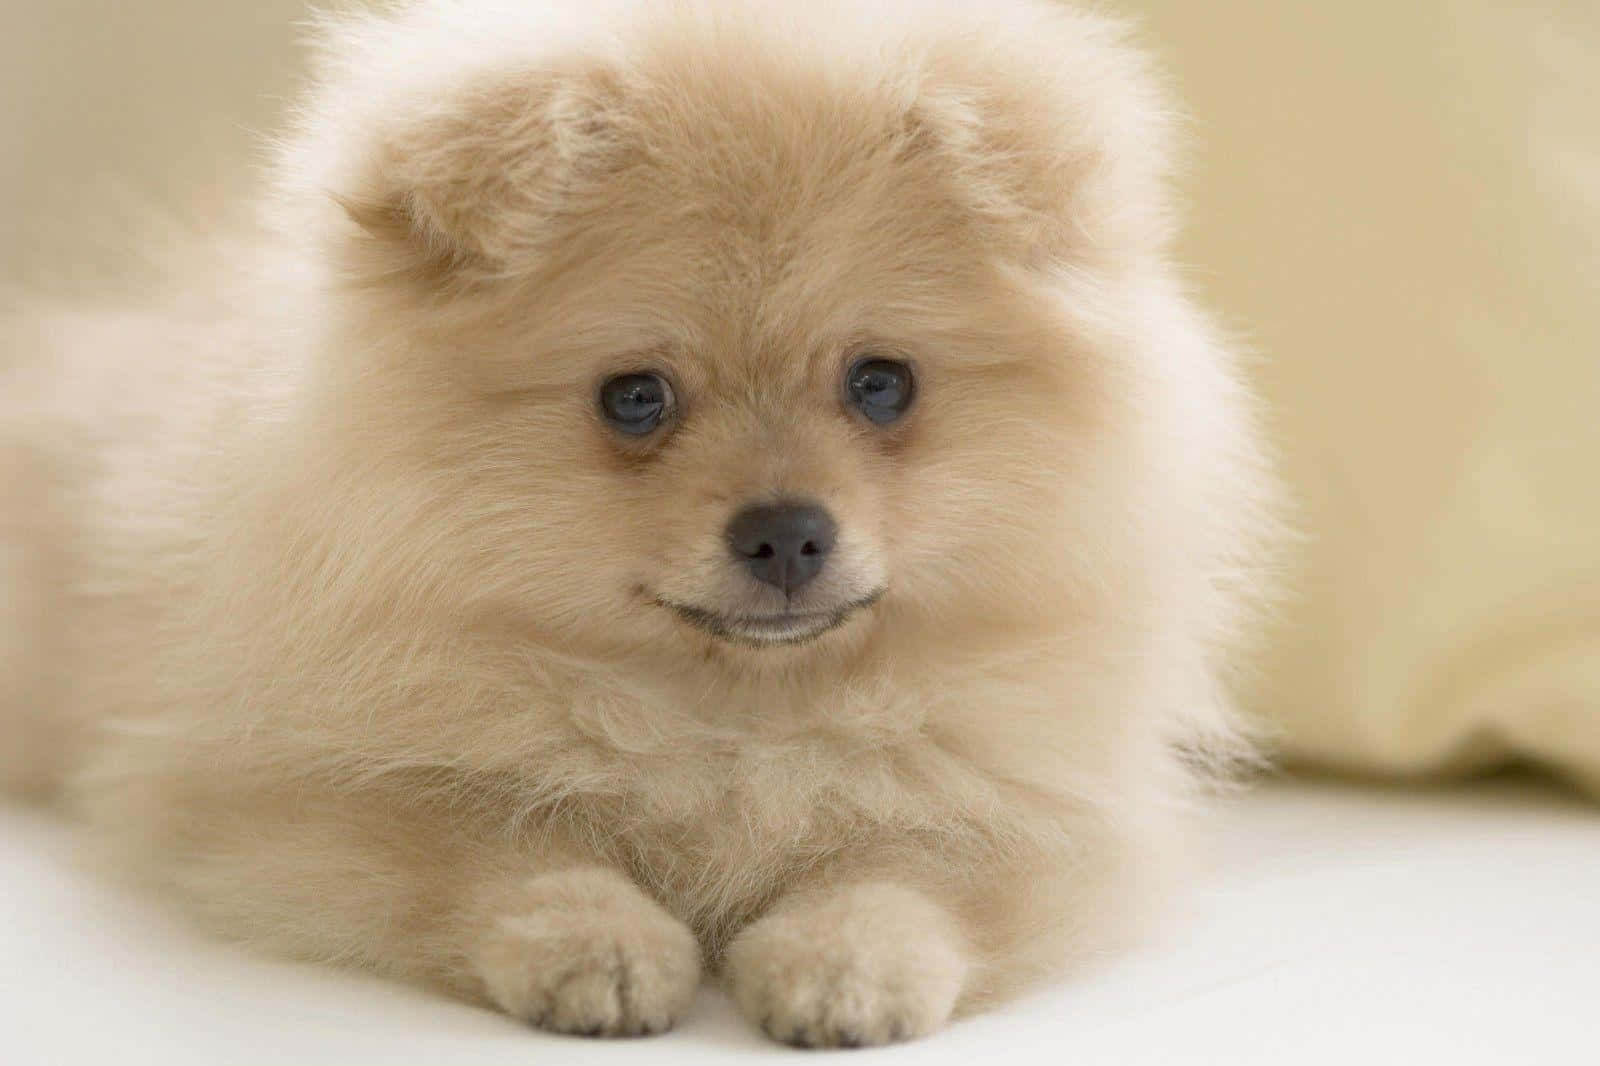 Fluffy Pomeranian On Bed Picture